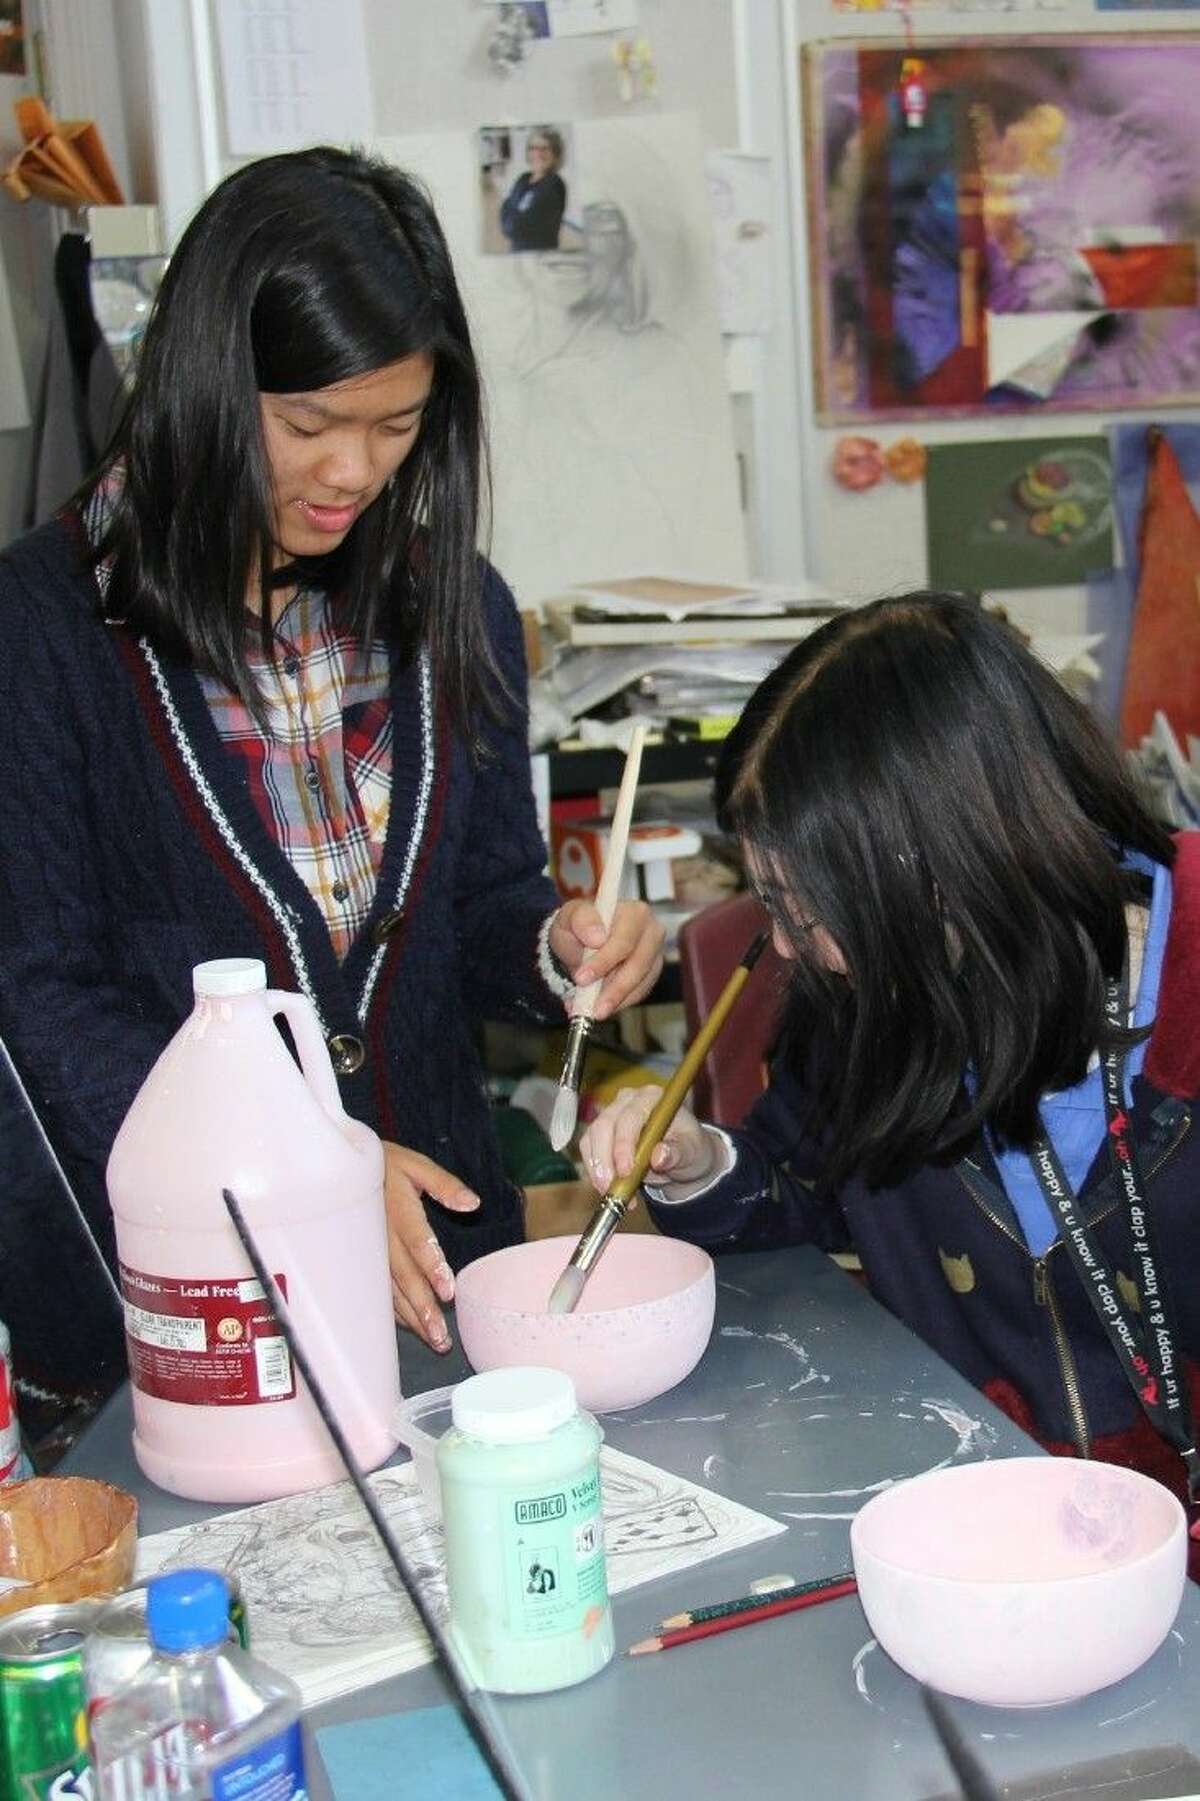 The John Cooper School seniors Meiya Cho and Haley Kent finish up some painting of a handmade bowl, which will be given away as part of the Empty Bowls Project fundraiser for the Interfaith Food Pantry on Saturday.